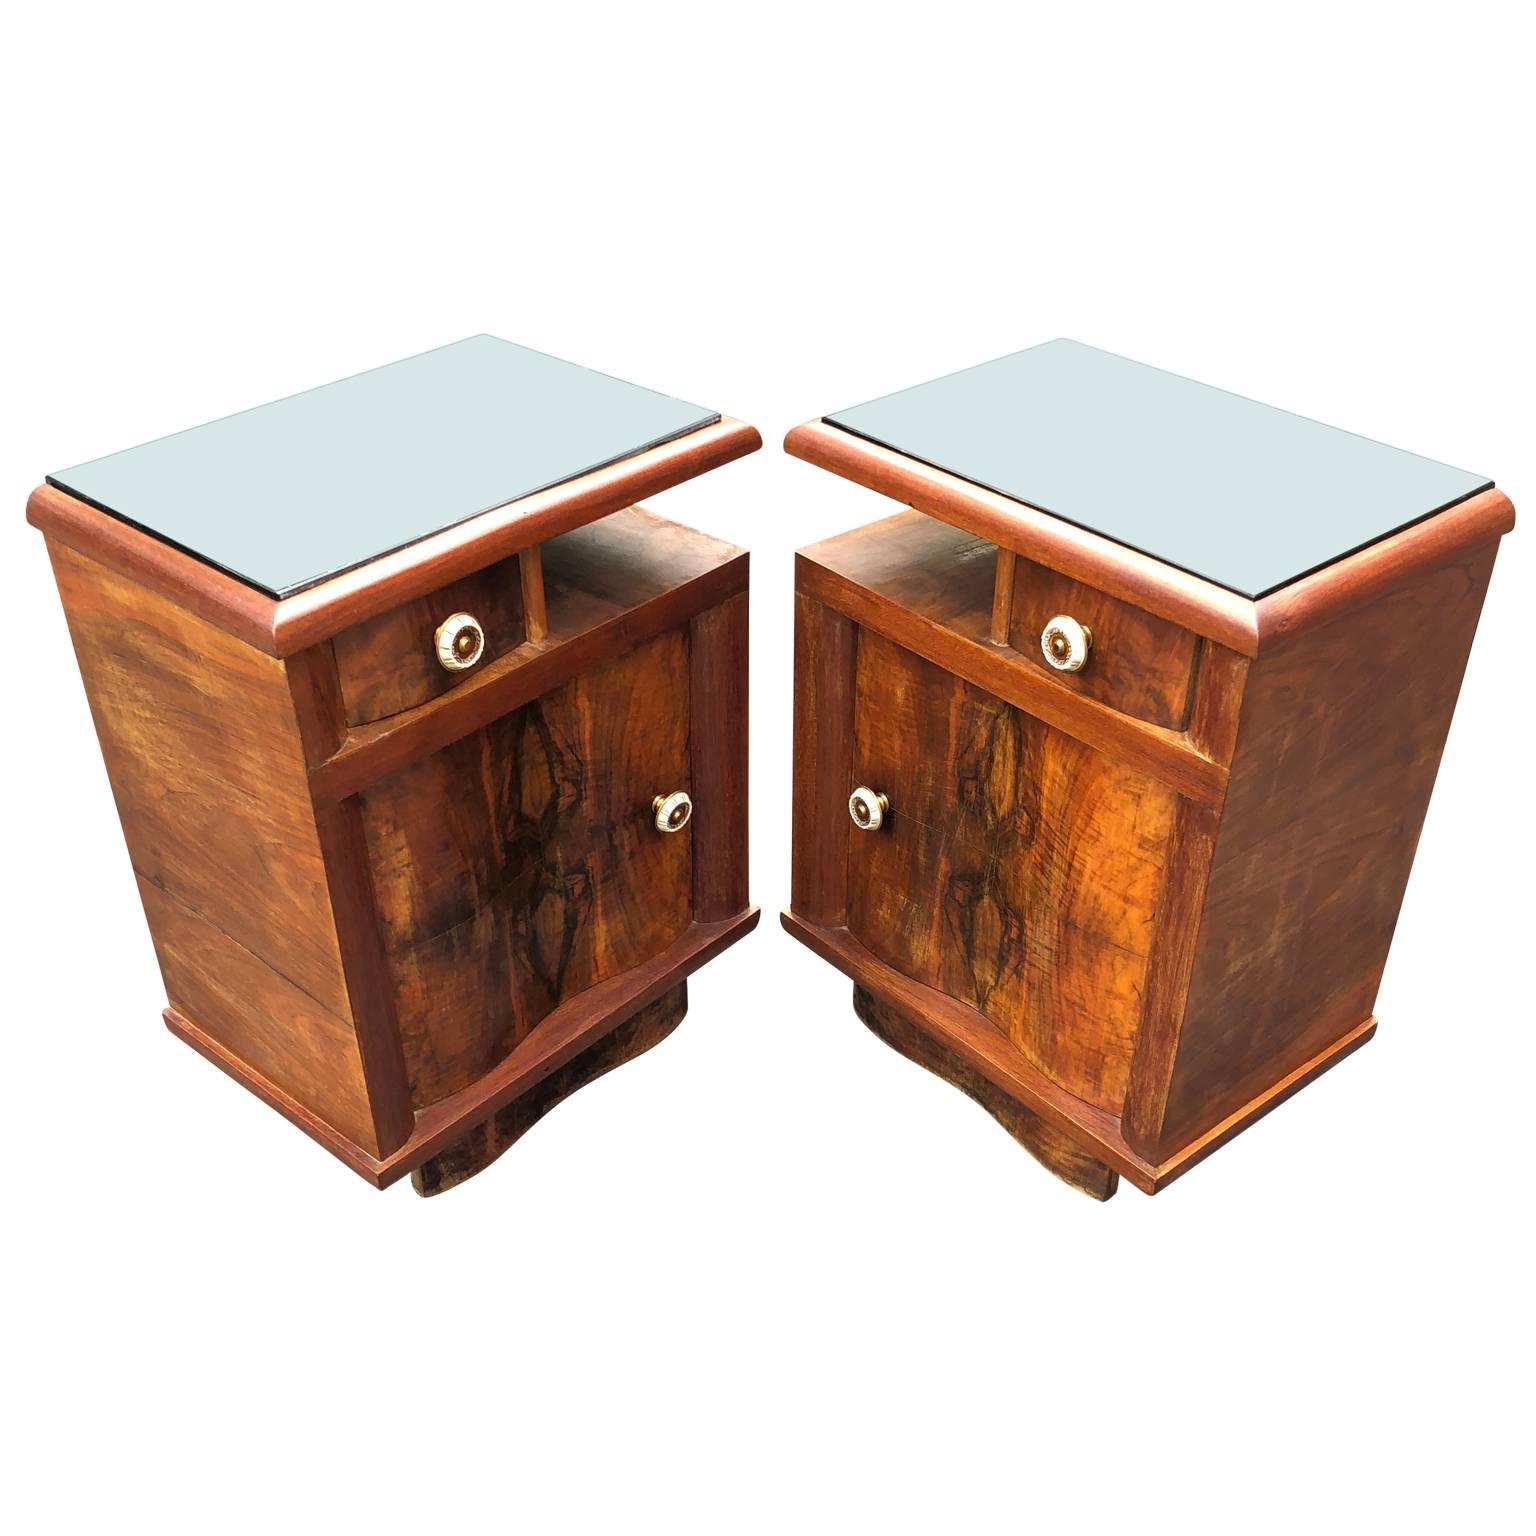 Pair of Italian Art Deco bed side tables or end tables.